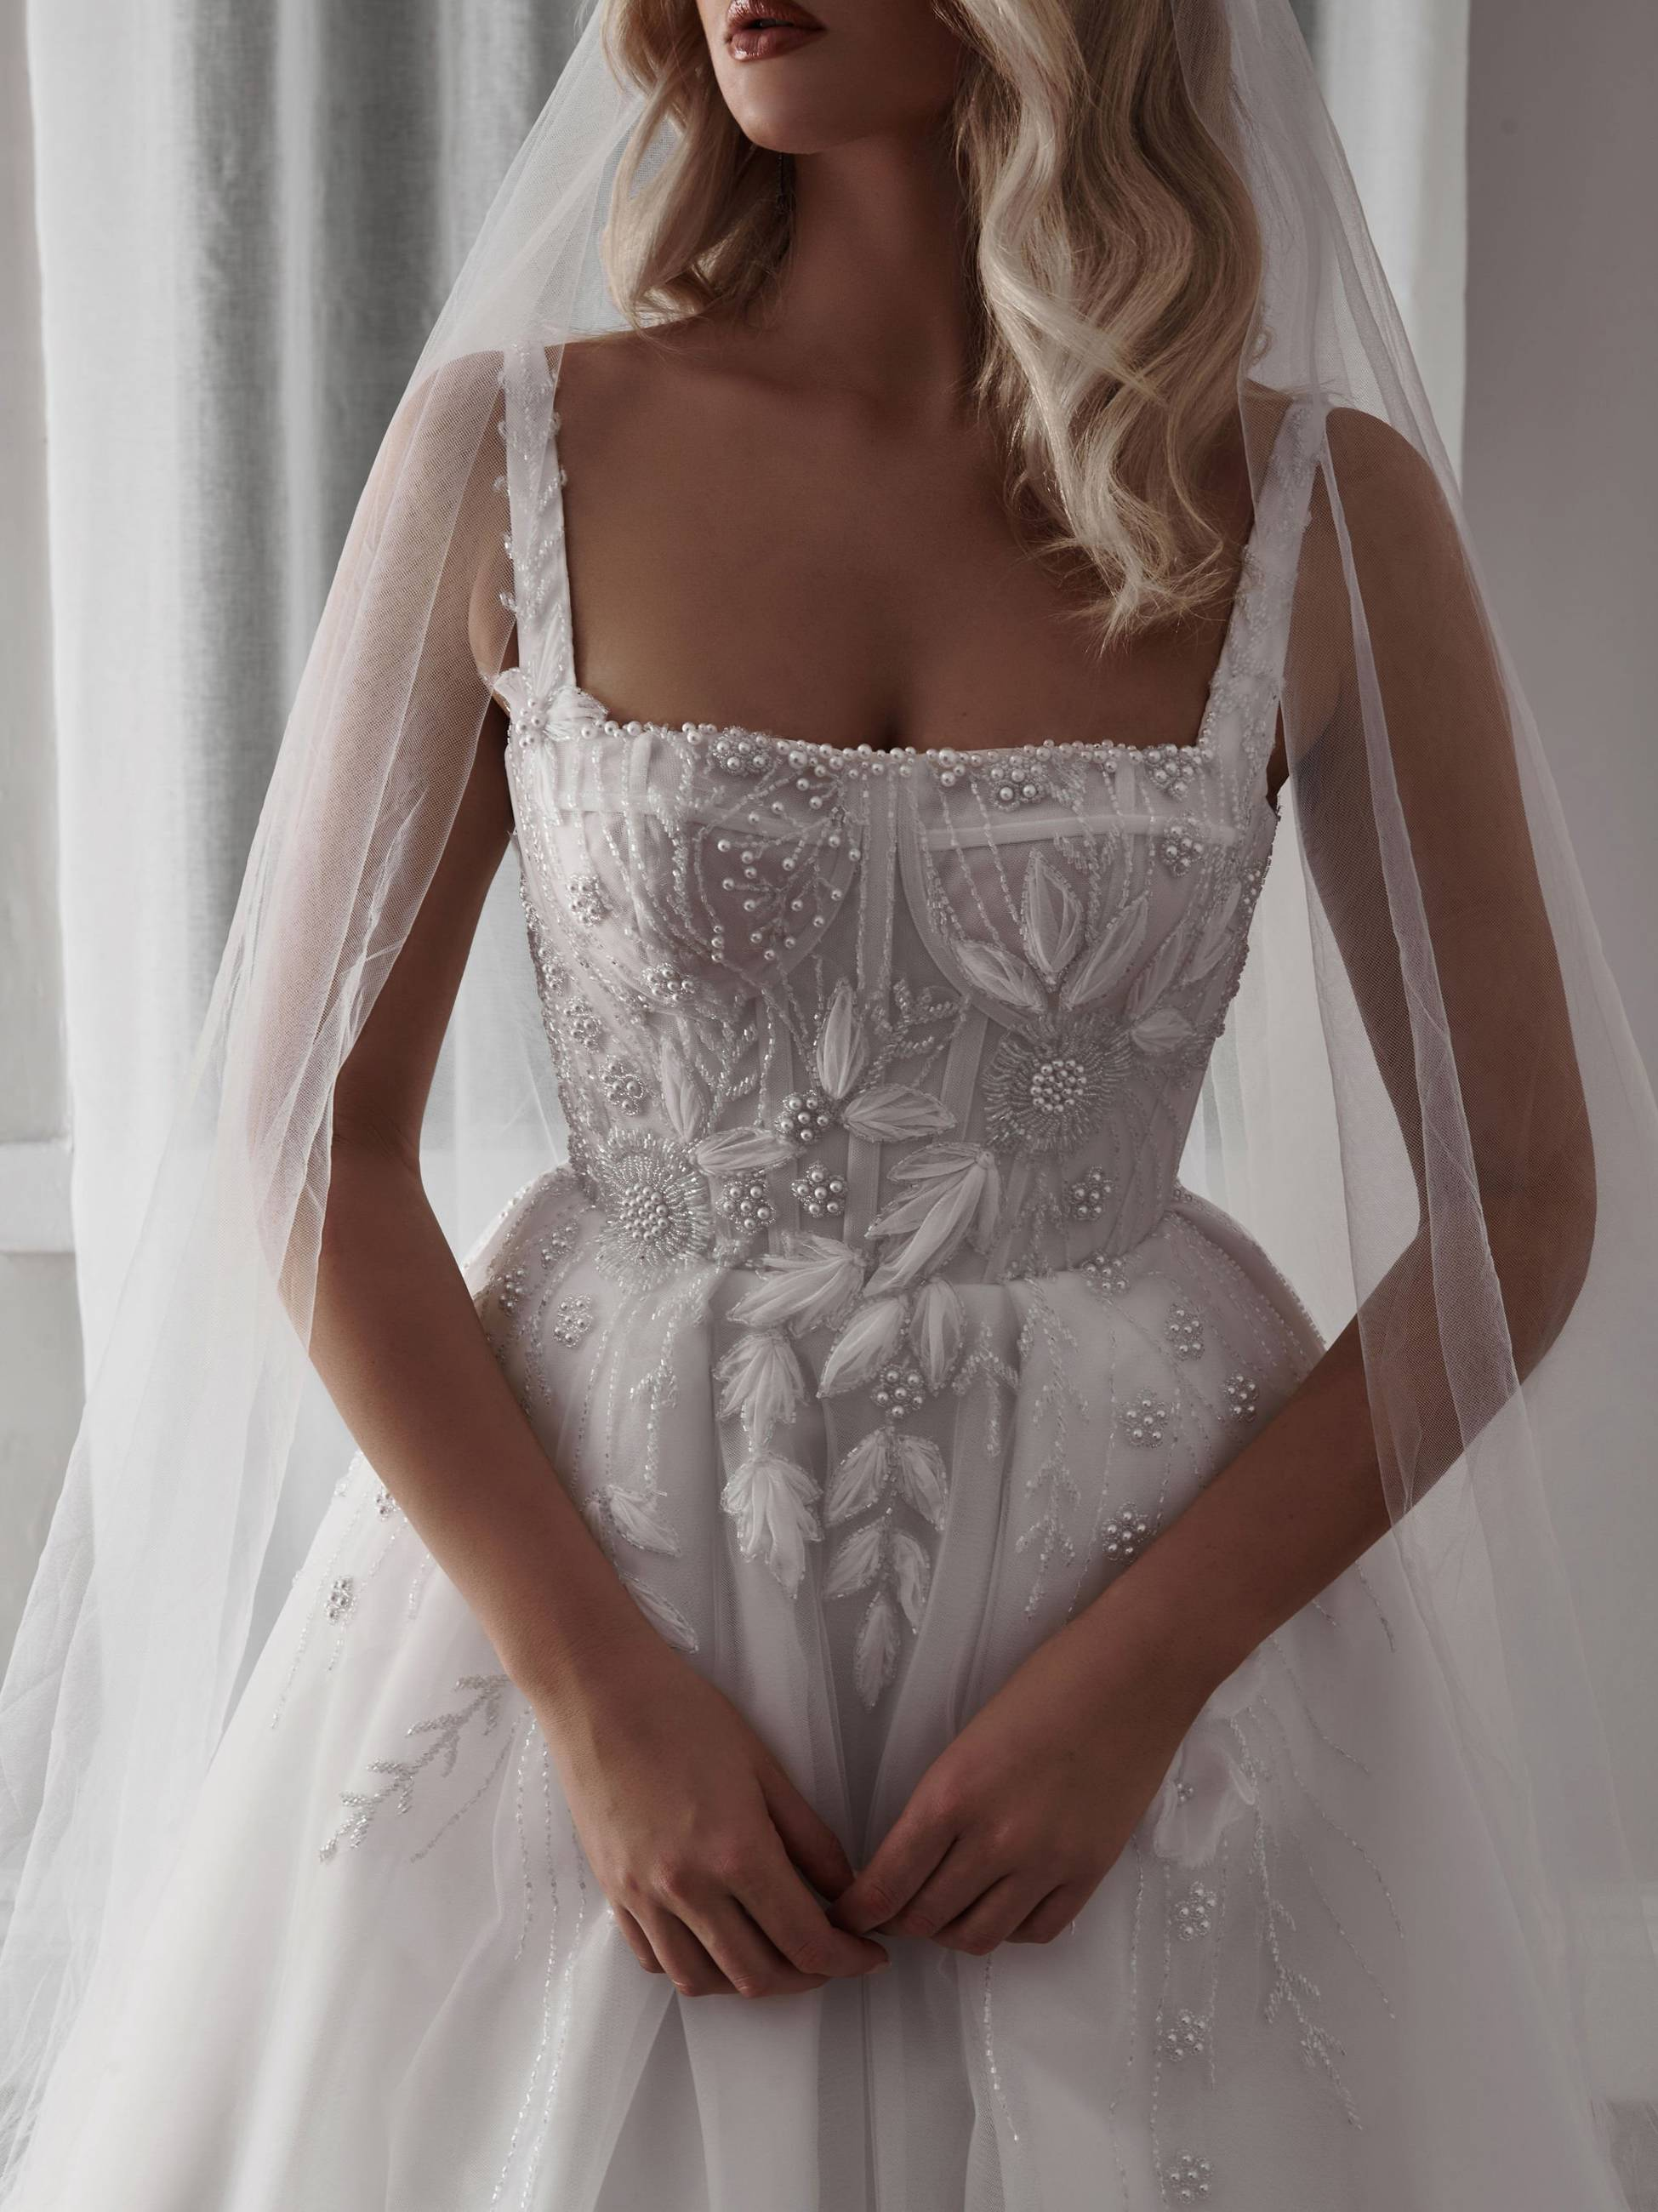 Coming Soon - Blanche Bridal Image